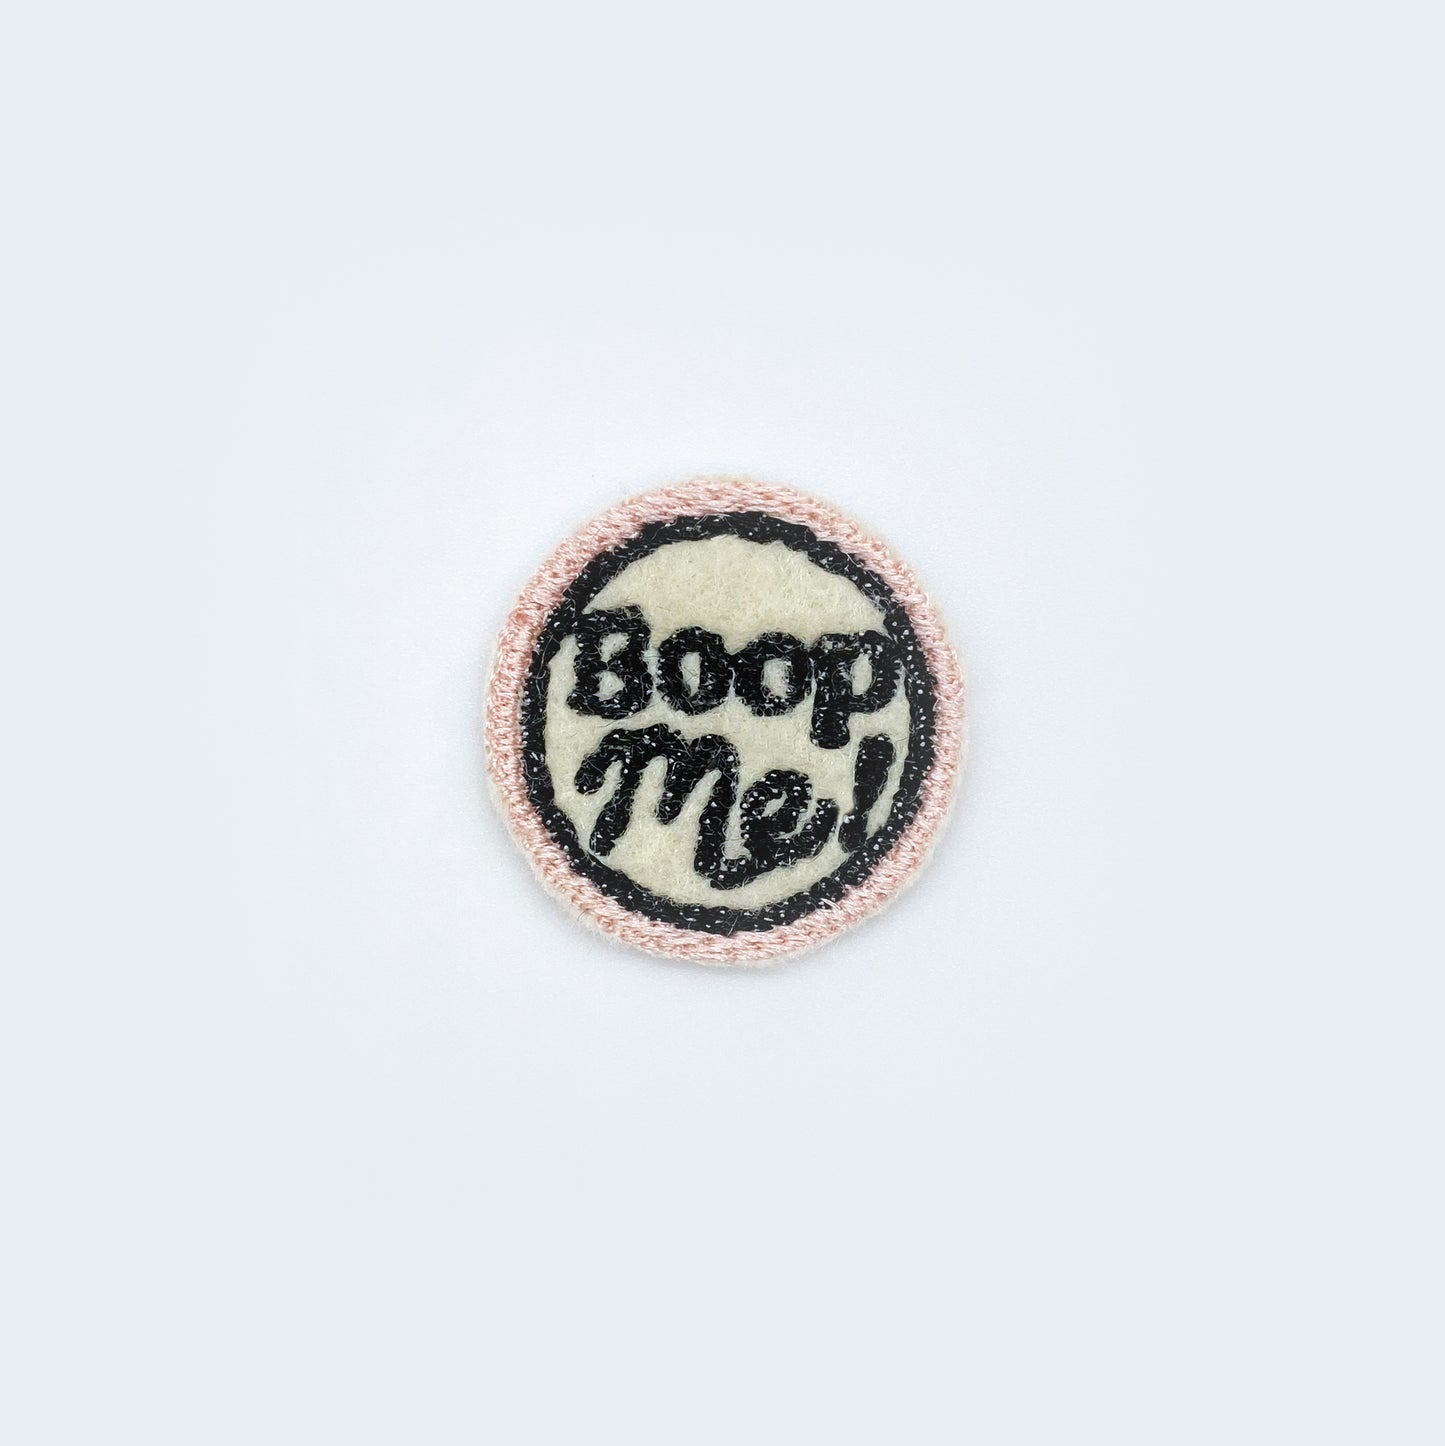 Boop Me Patch for dog cat pet bow tie BIG PUPPA  pet apparel with custom Bop Pop Pets